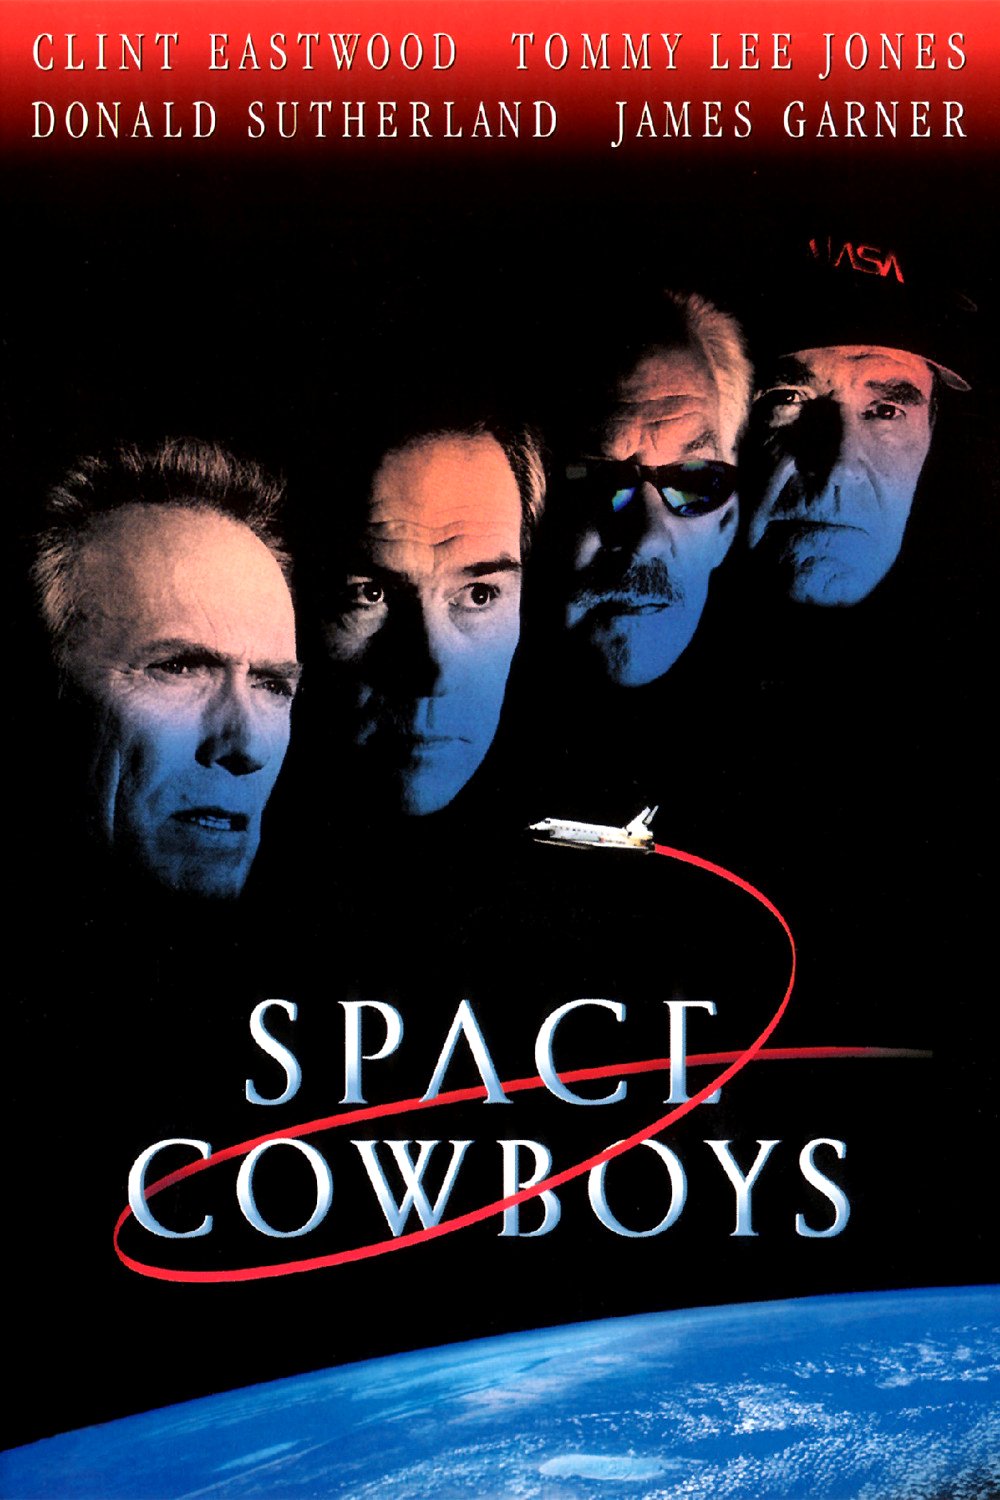 Space Cowboys Movie Poster Google image from http://wp.artemi.us/wp-content/uploads/2011/08/space-cowboys-original.jpg